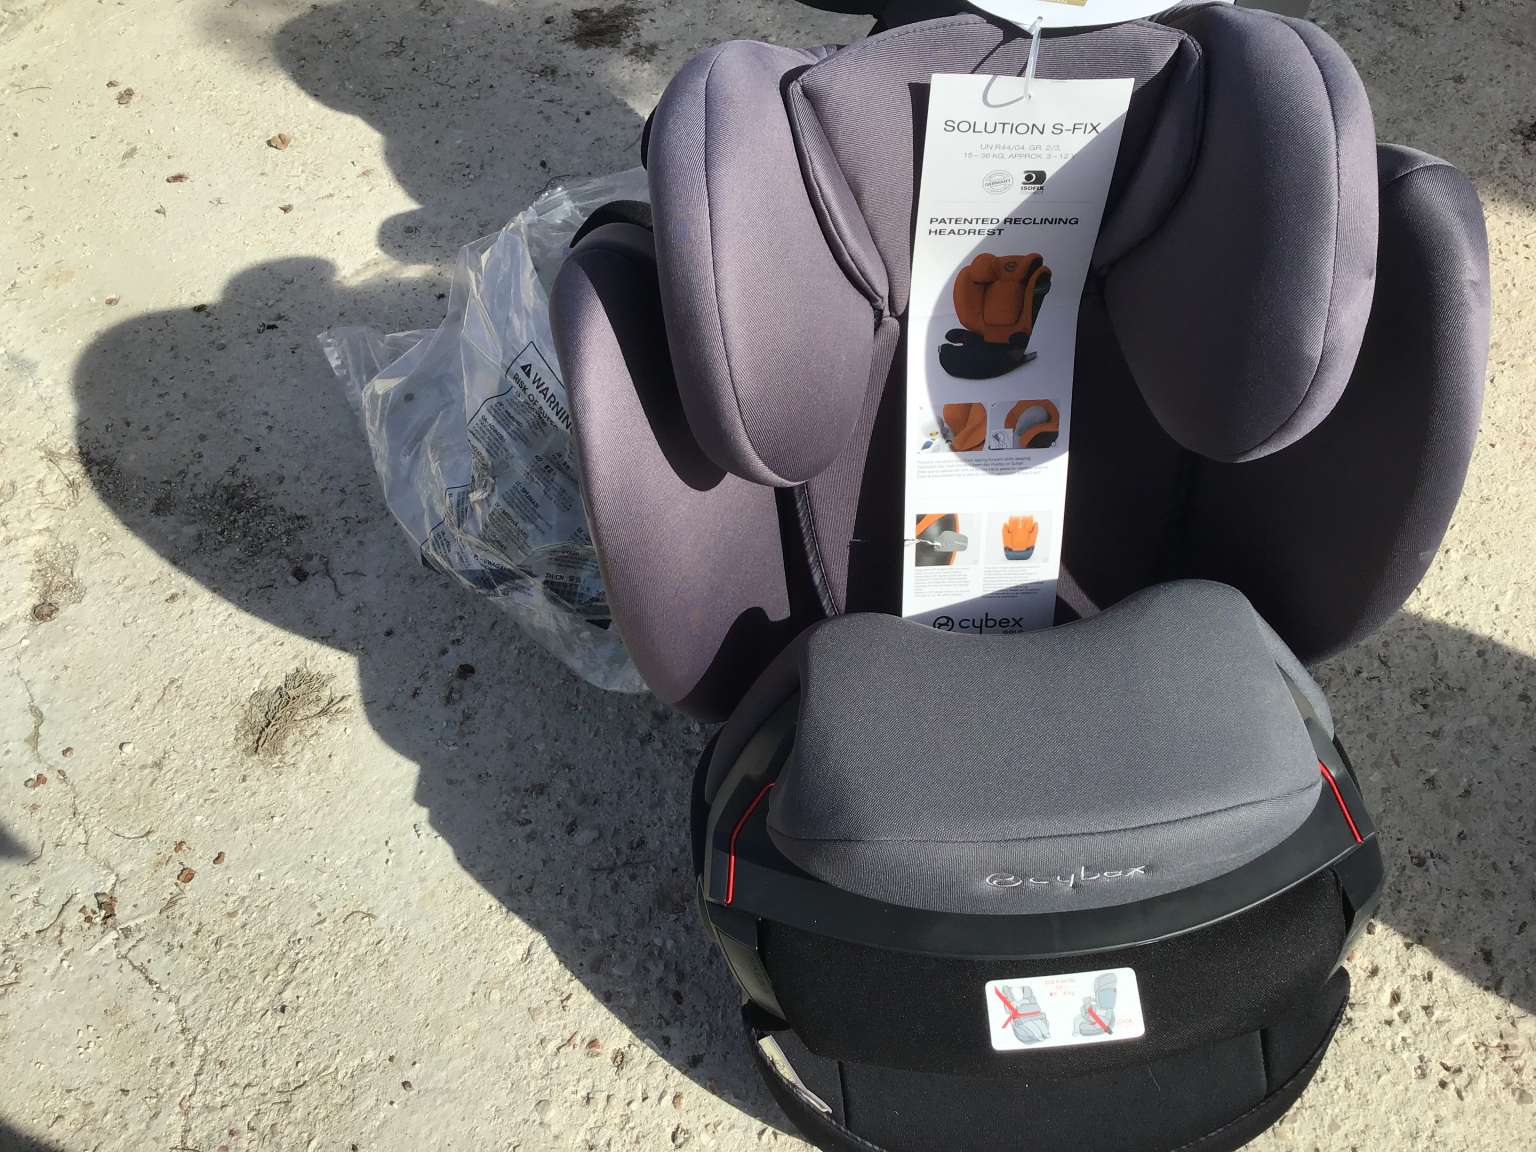 Older child isofix booster with back seats – Costa Blanca Nursery Hire